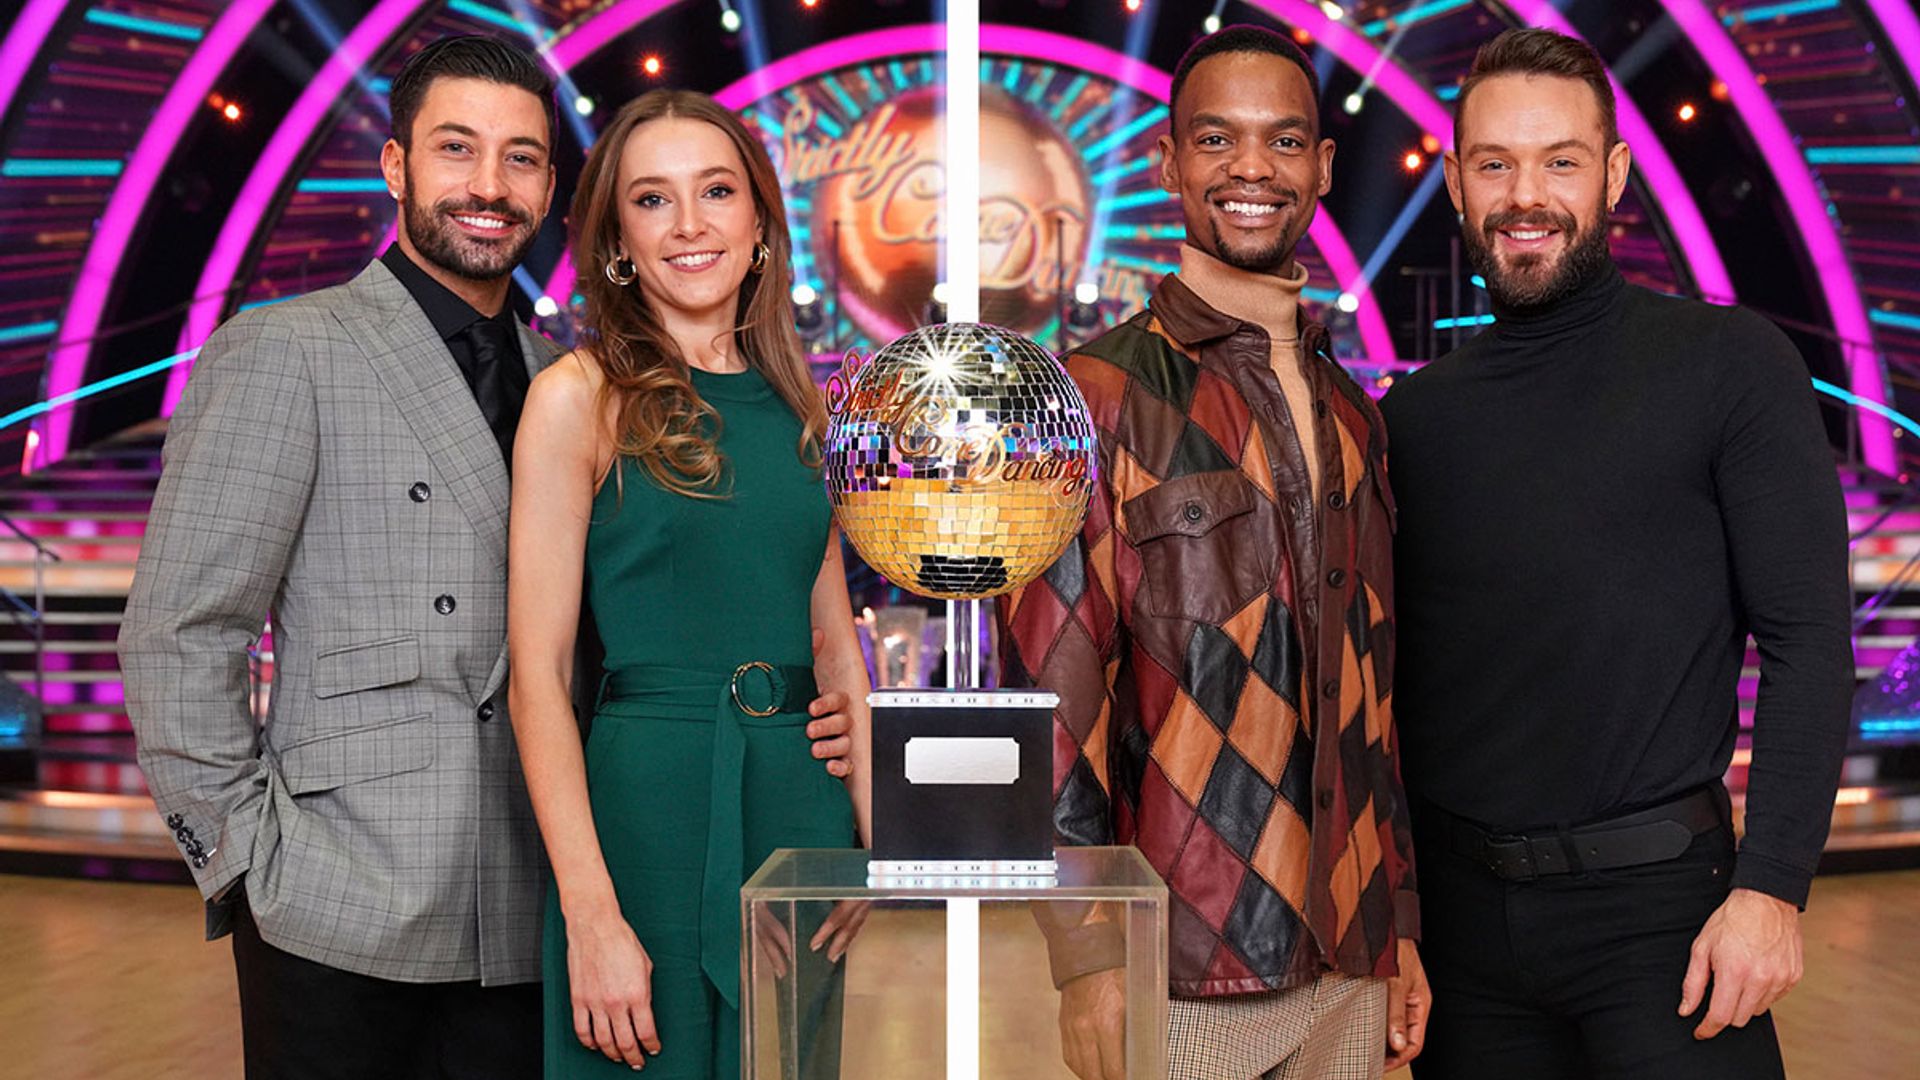 Strictly Come Dancing 2021 winner revealed